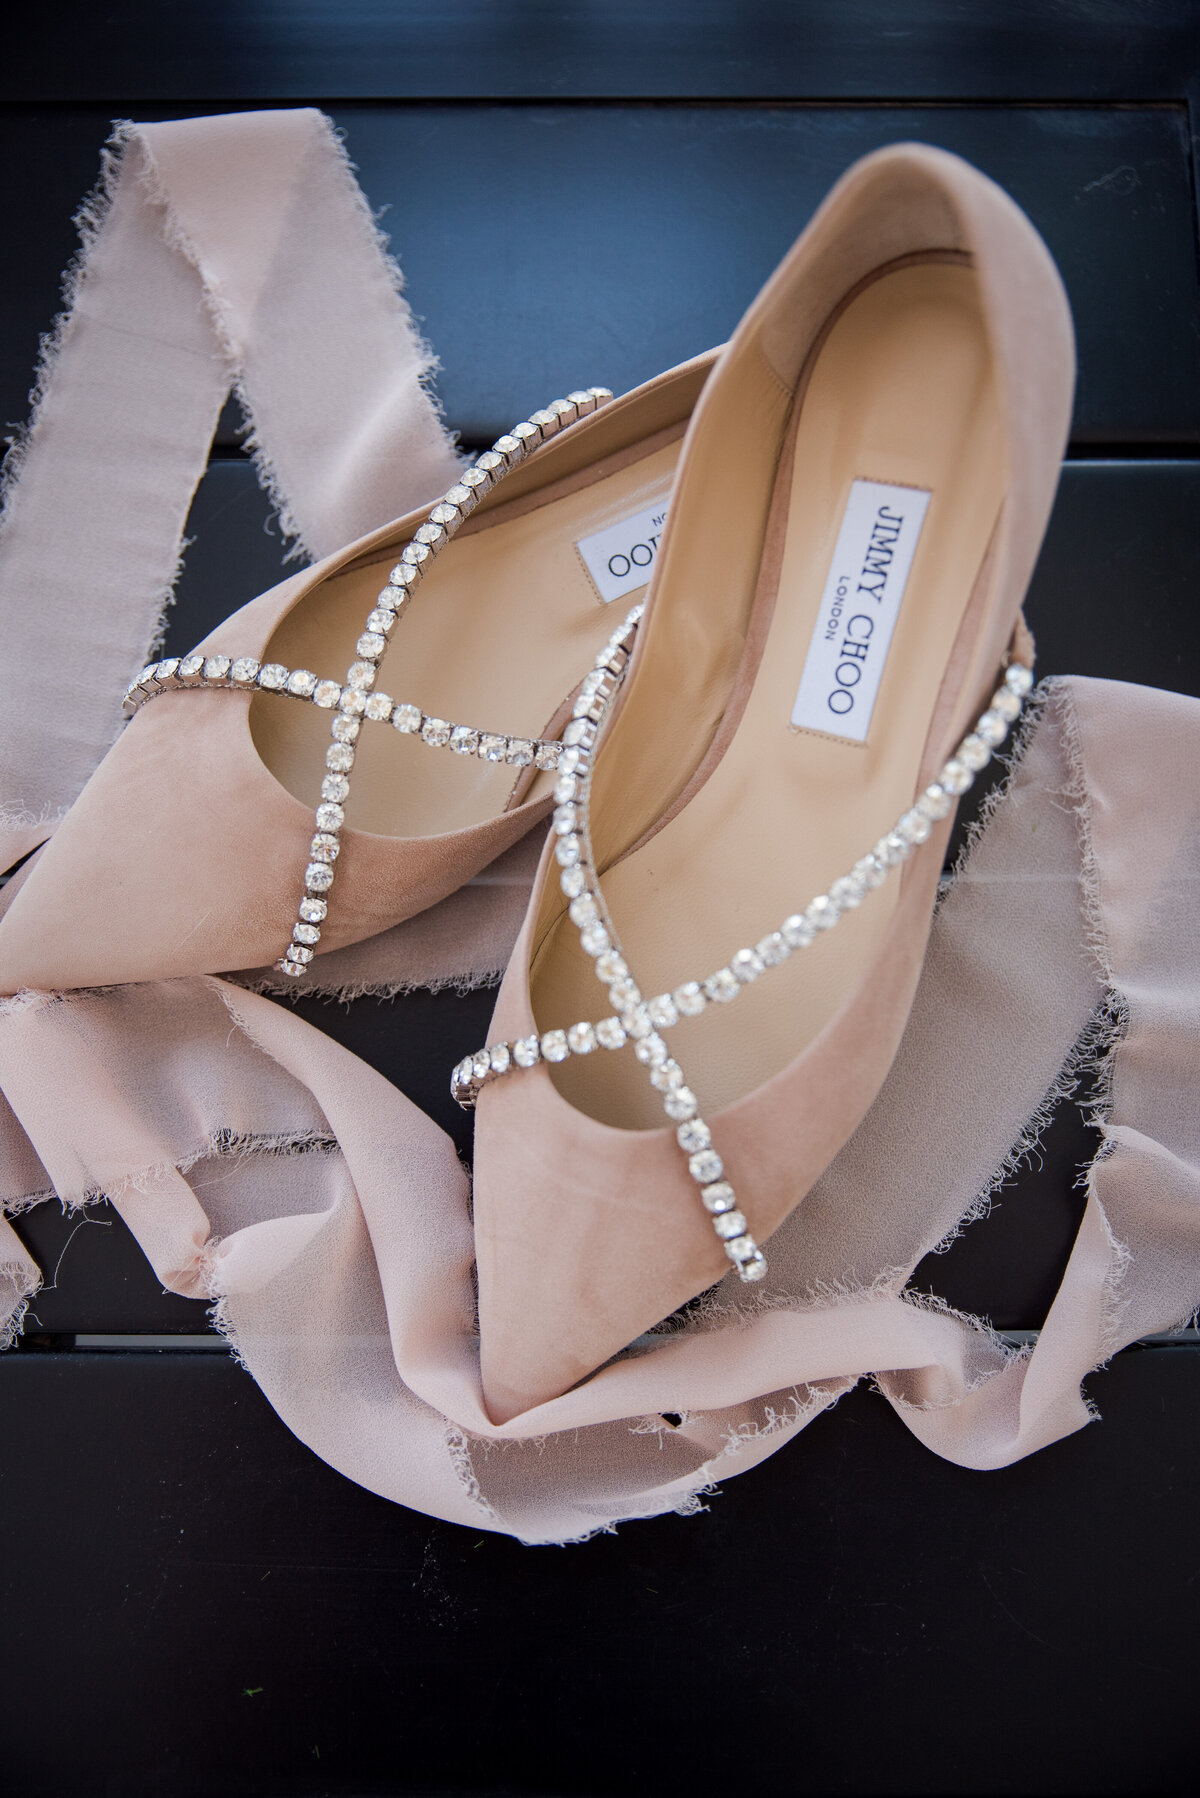 A pair of bridal Jimmy Choo shoes that are light pink with rhinestones.